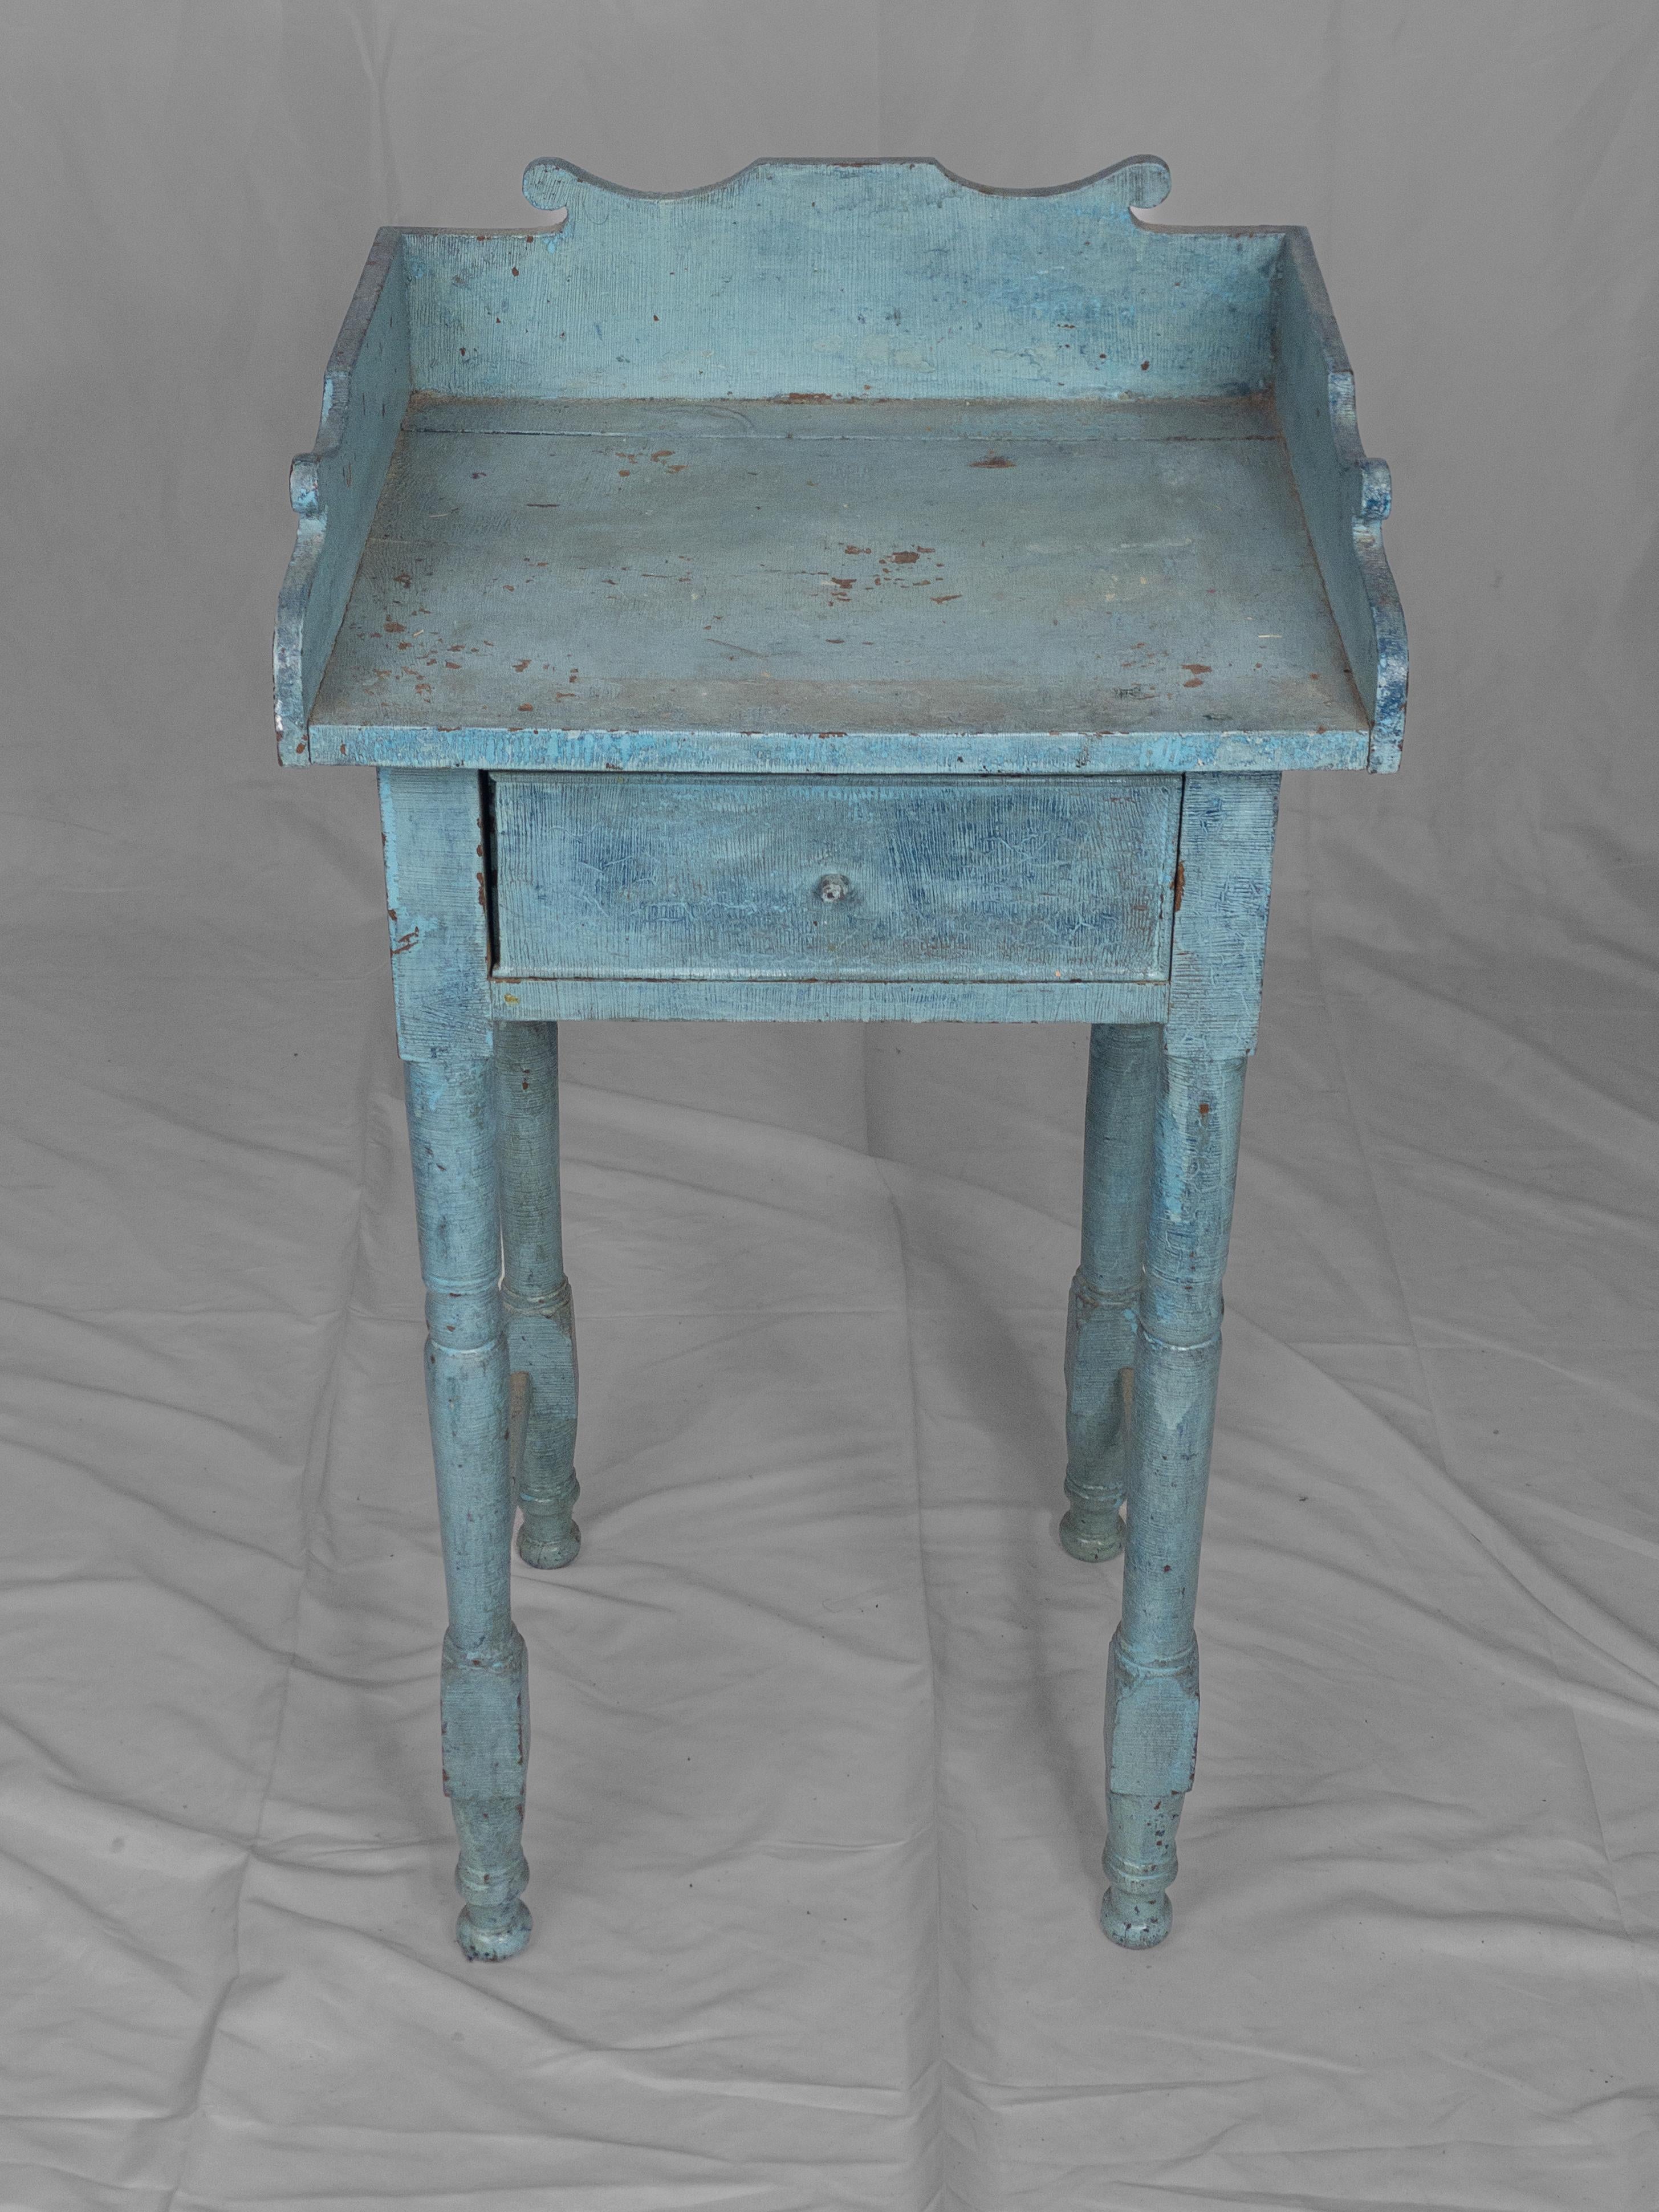 The Rare 19th Century American Painted Wooden Side Stand is a captivating piece of antique furniture with historical significance. Painted in a delicate baby blue hue, this color choice reflects the aesthetics of the 19th century and adds a